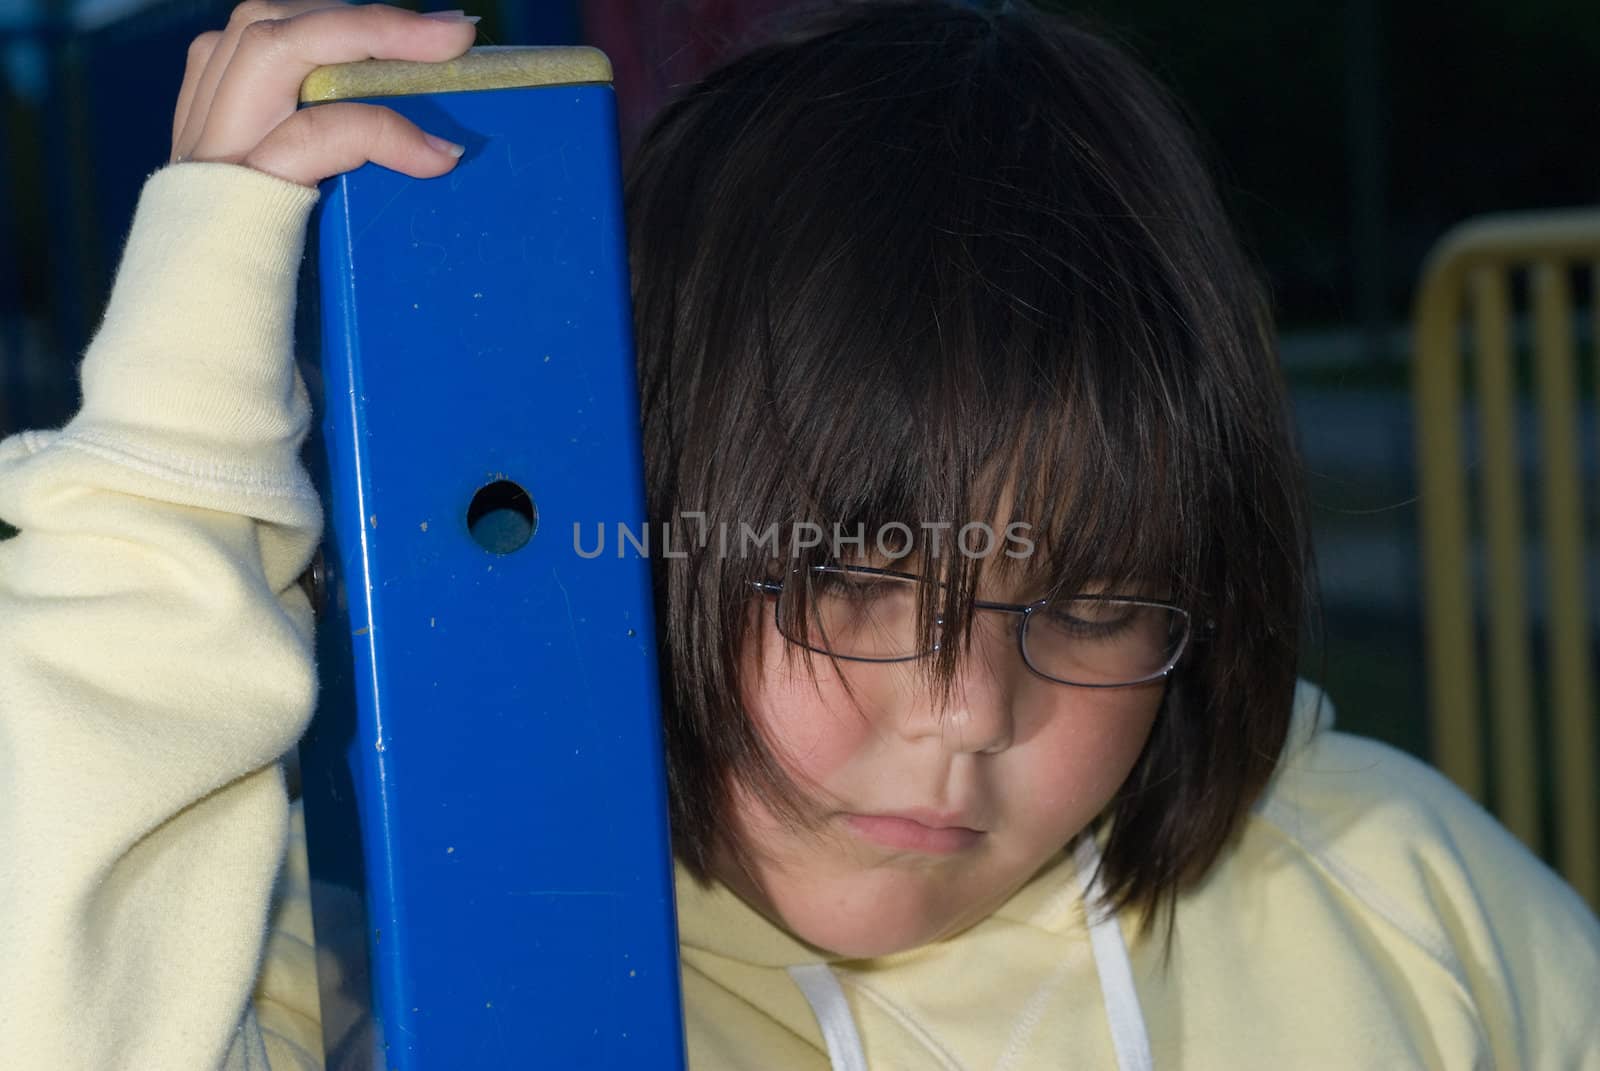 A young girl looking sad and depressed holding onto a blue pole